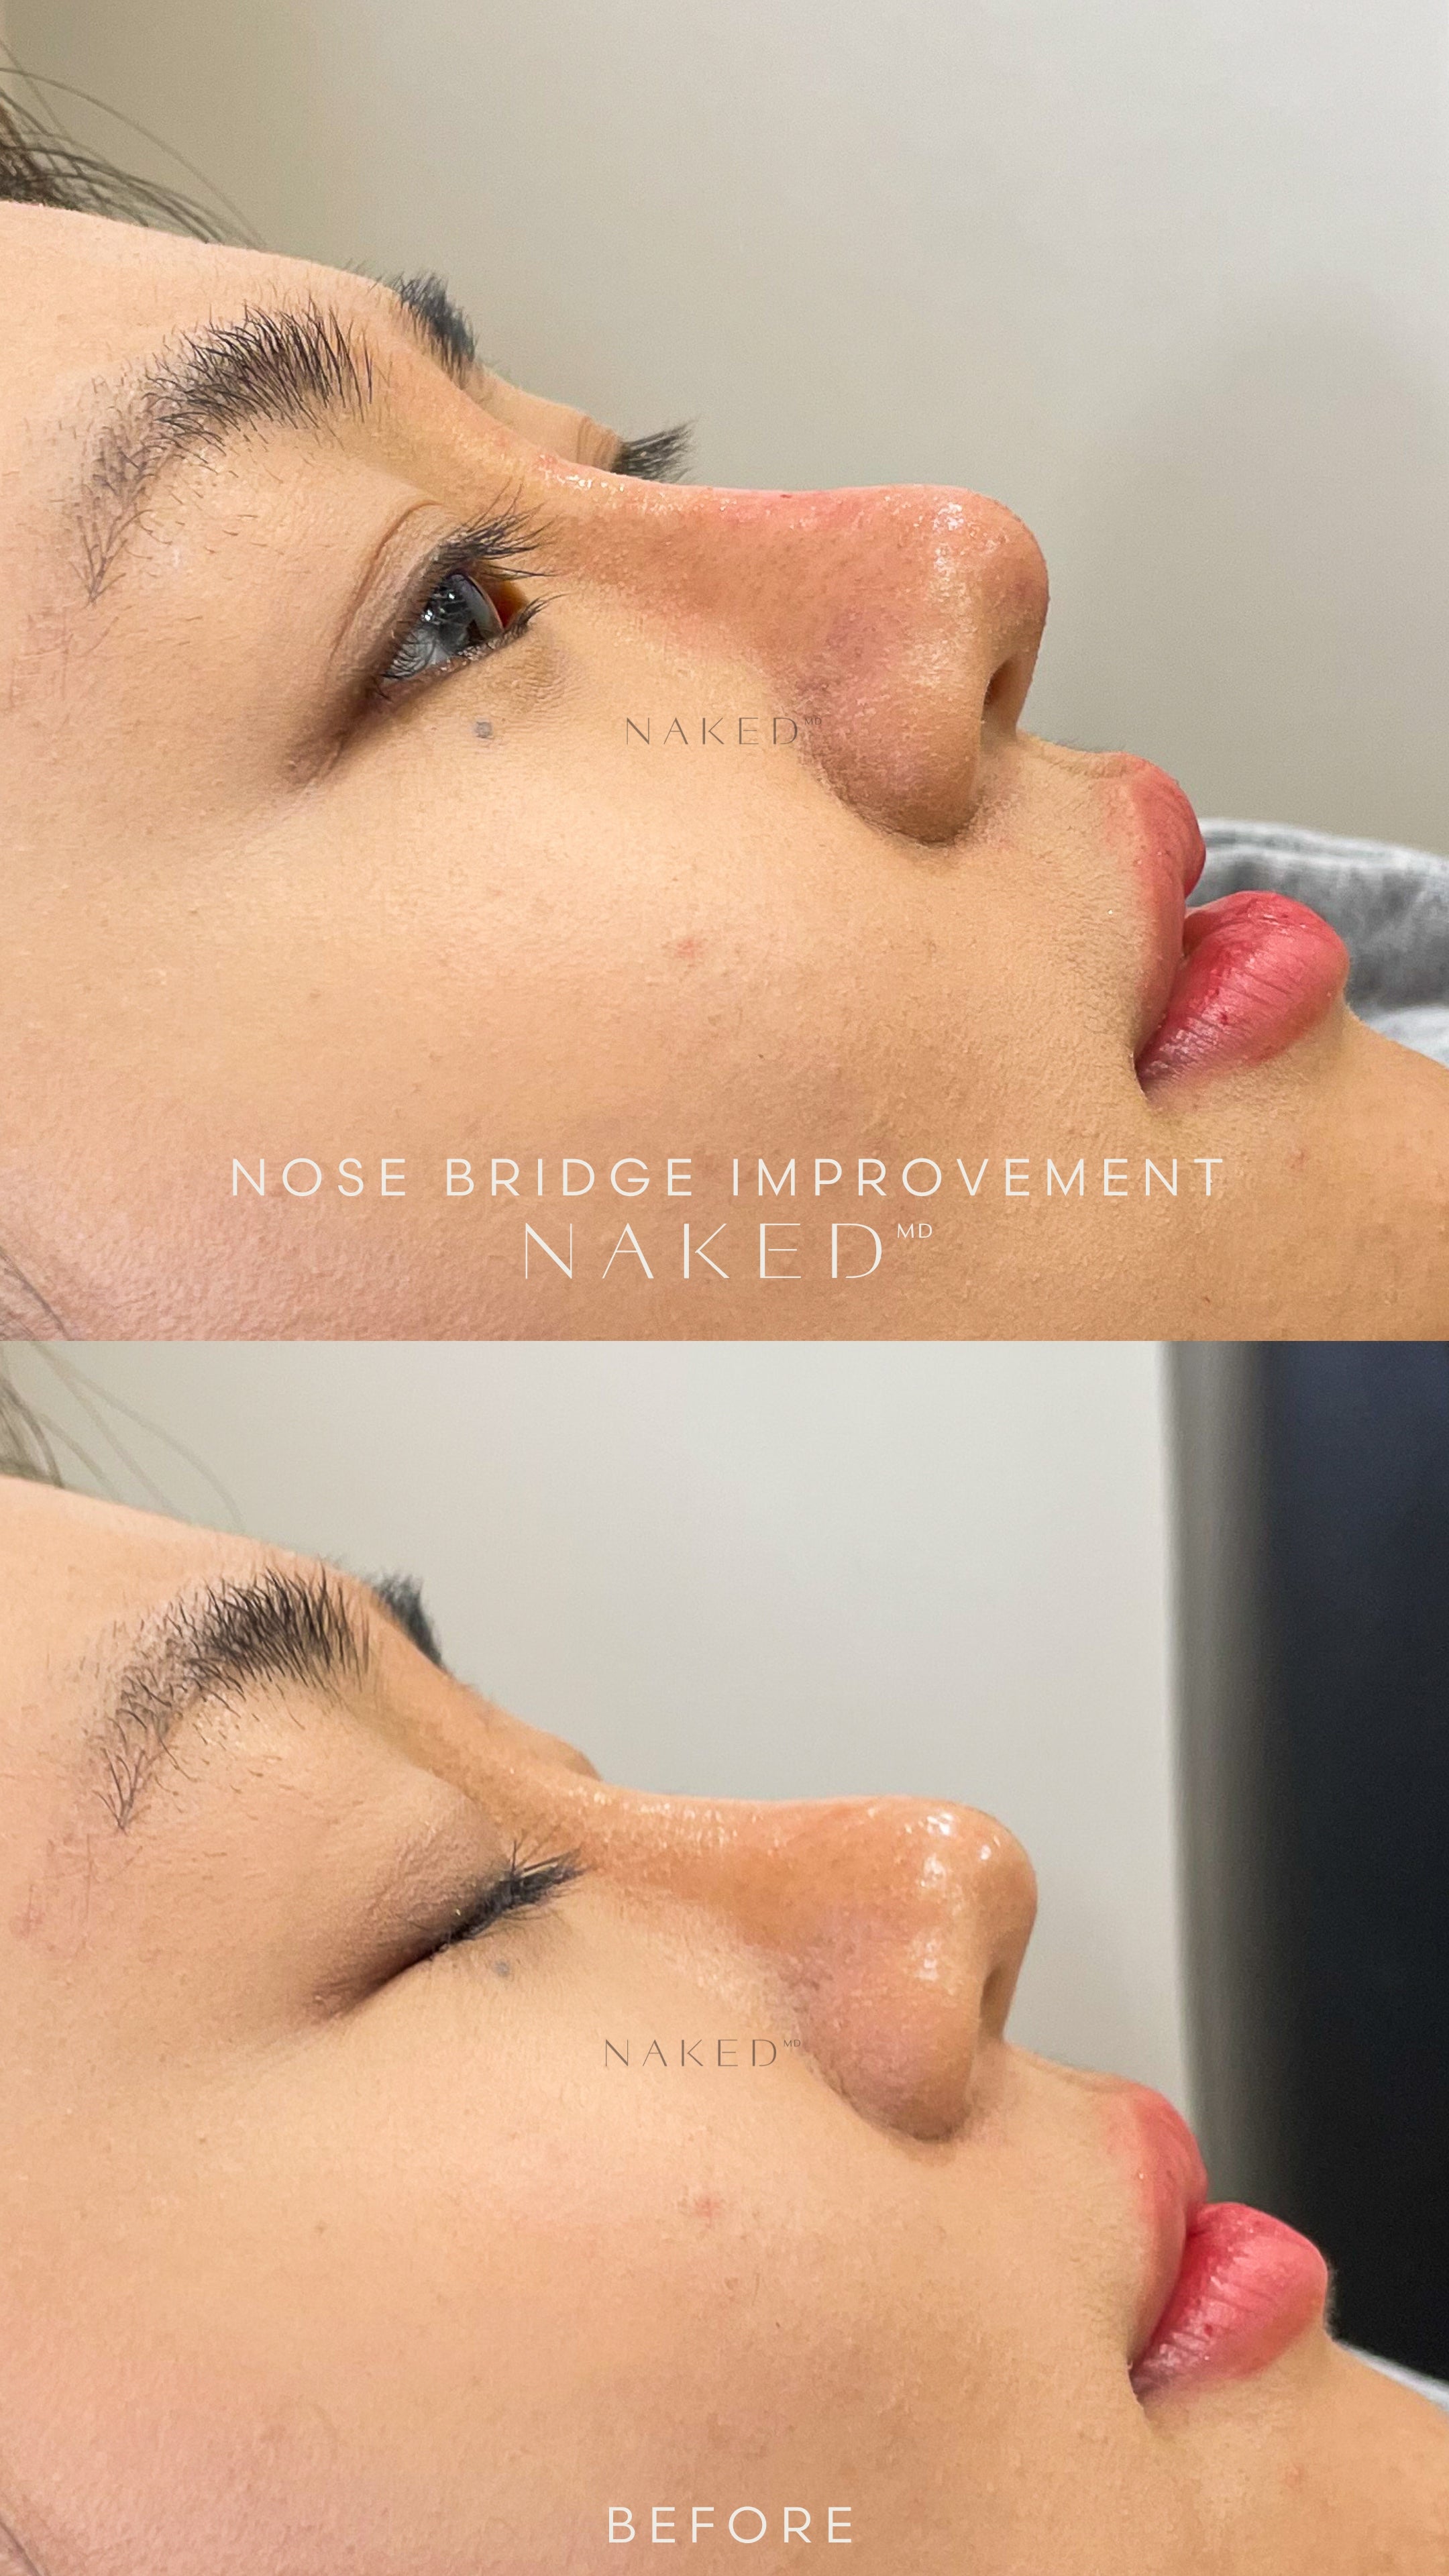 Naked Nose® Non Surgical Nose Job (NSNJ)